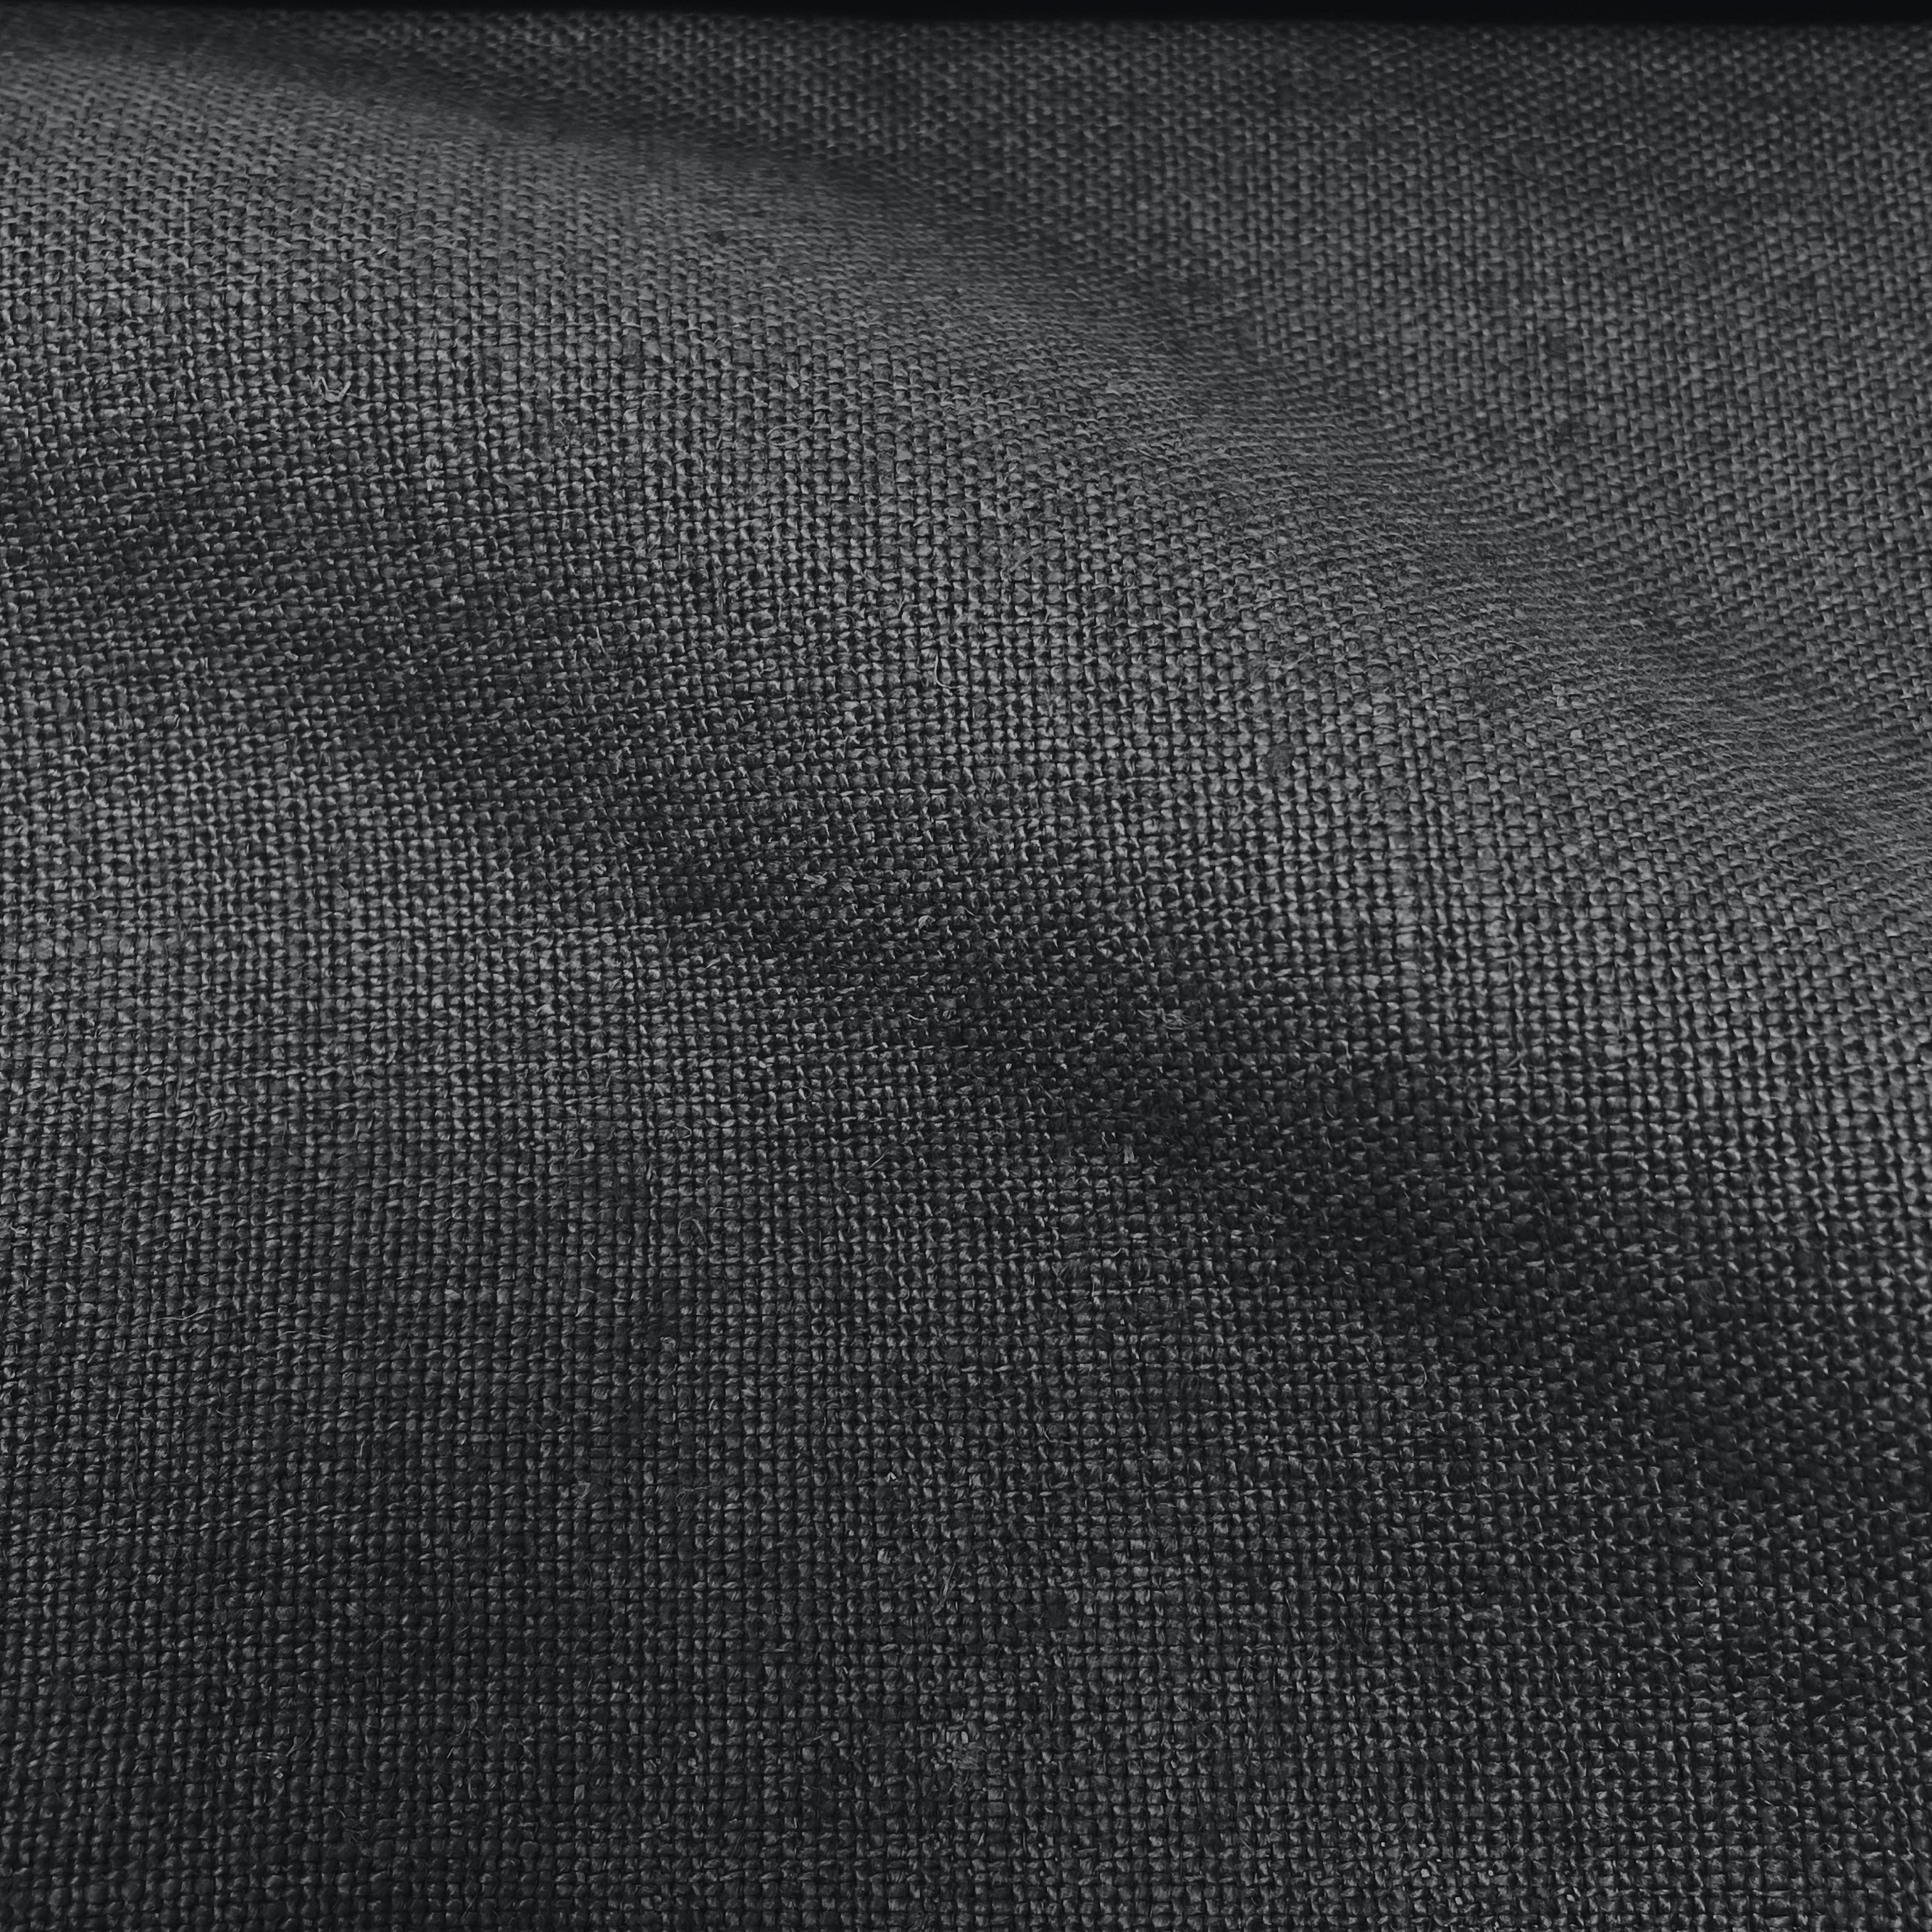 Linen Fabric 60 Wide Natural 100% Linen By The Yard (Black